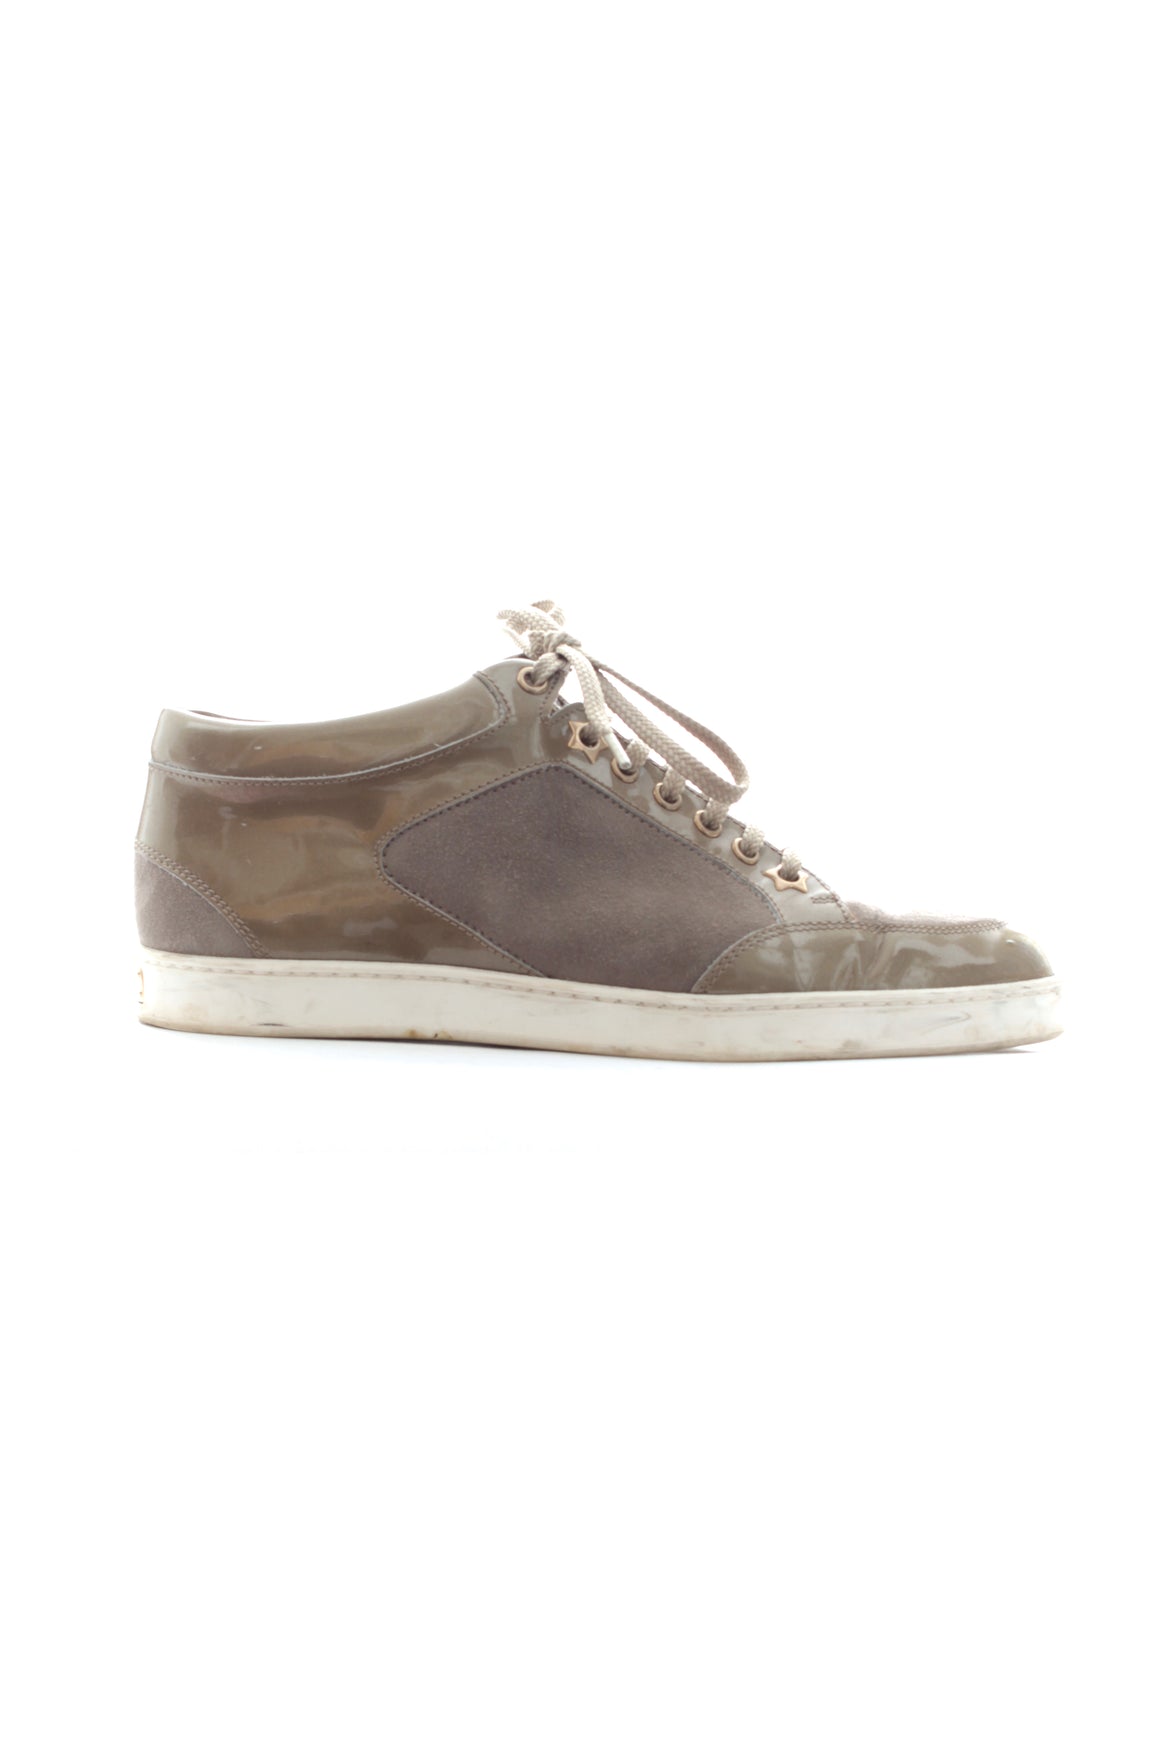 Jimmy Choo 'Miami' Suede and Patent Leather Sneakers